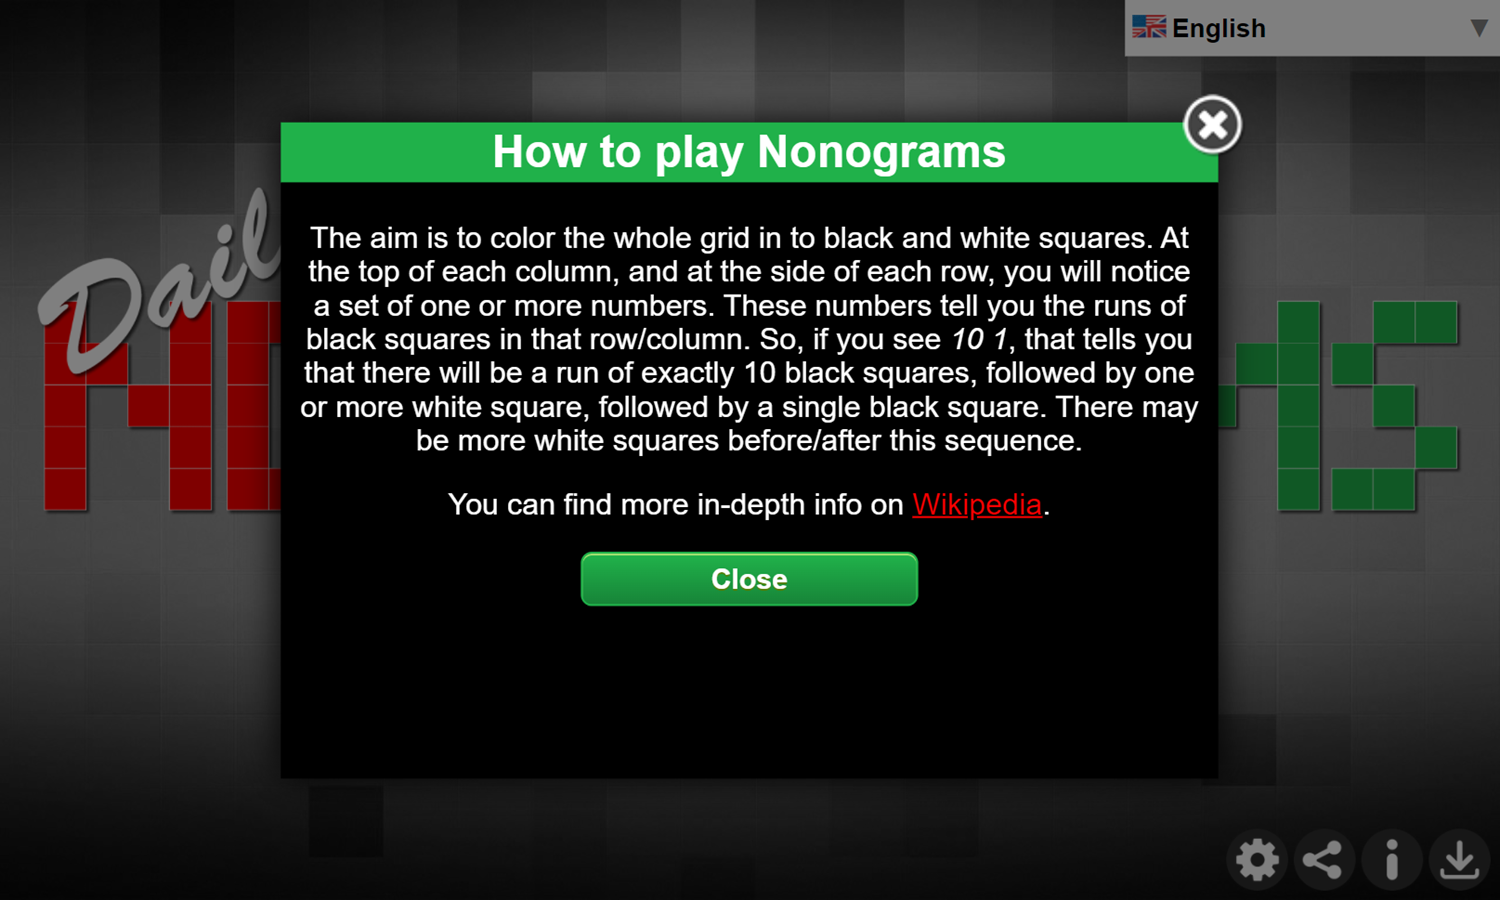 Daily Nonograms Game How To Play Screenshot.